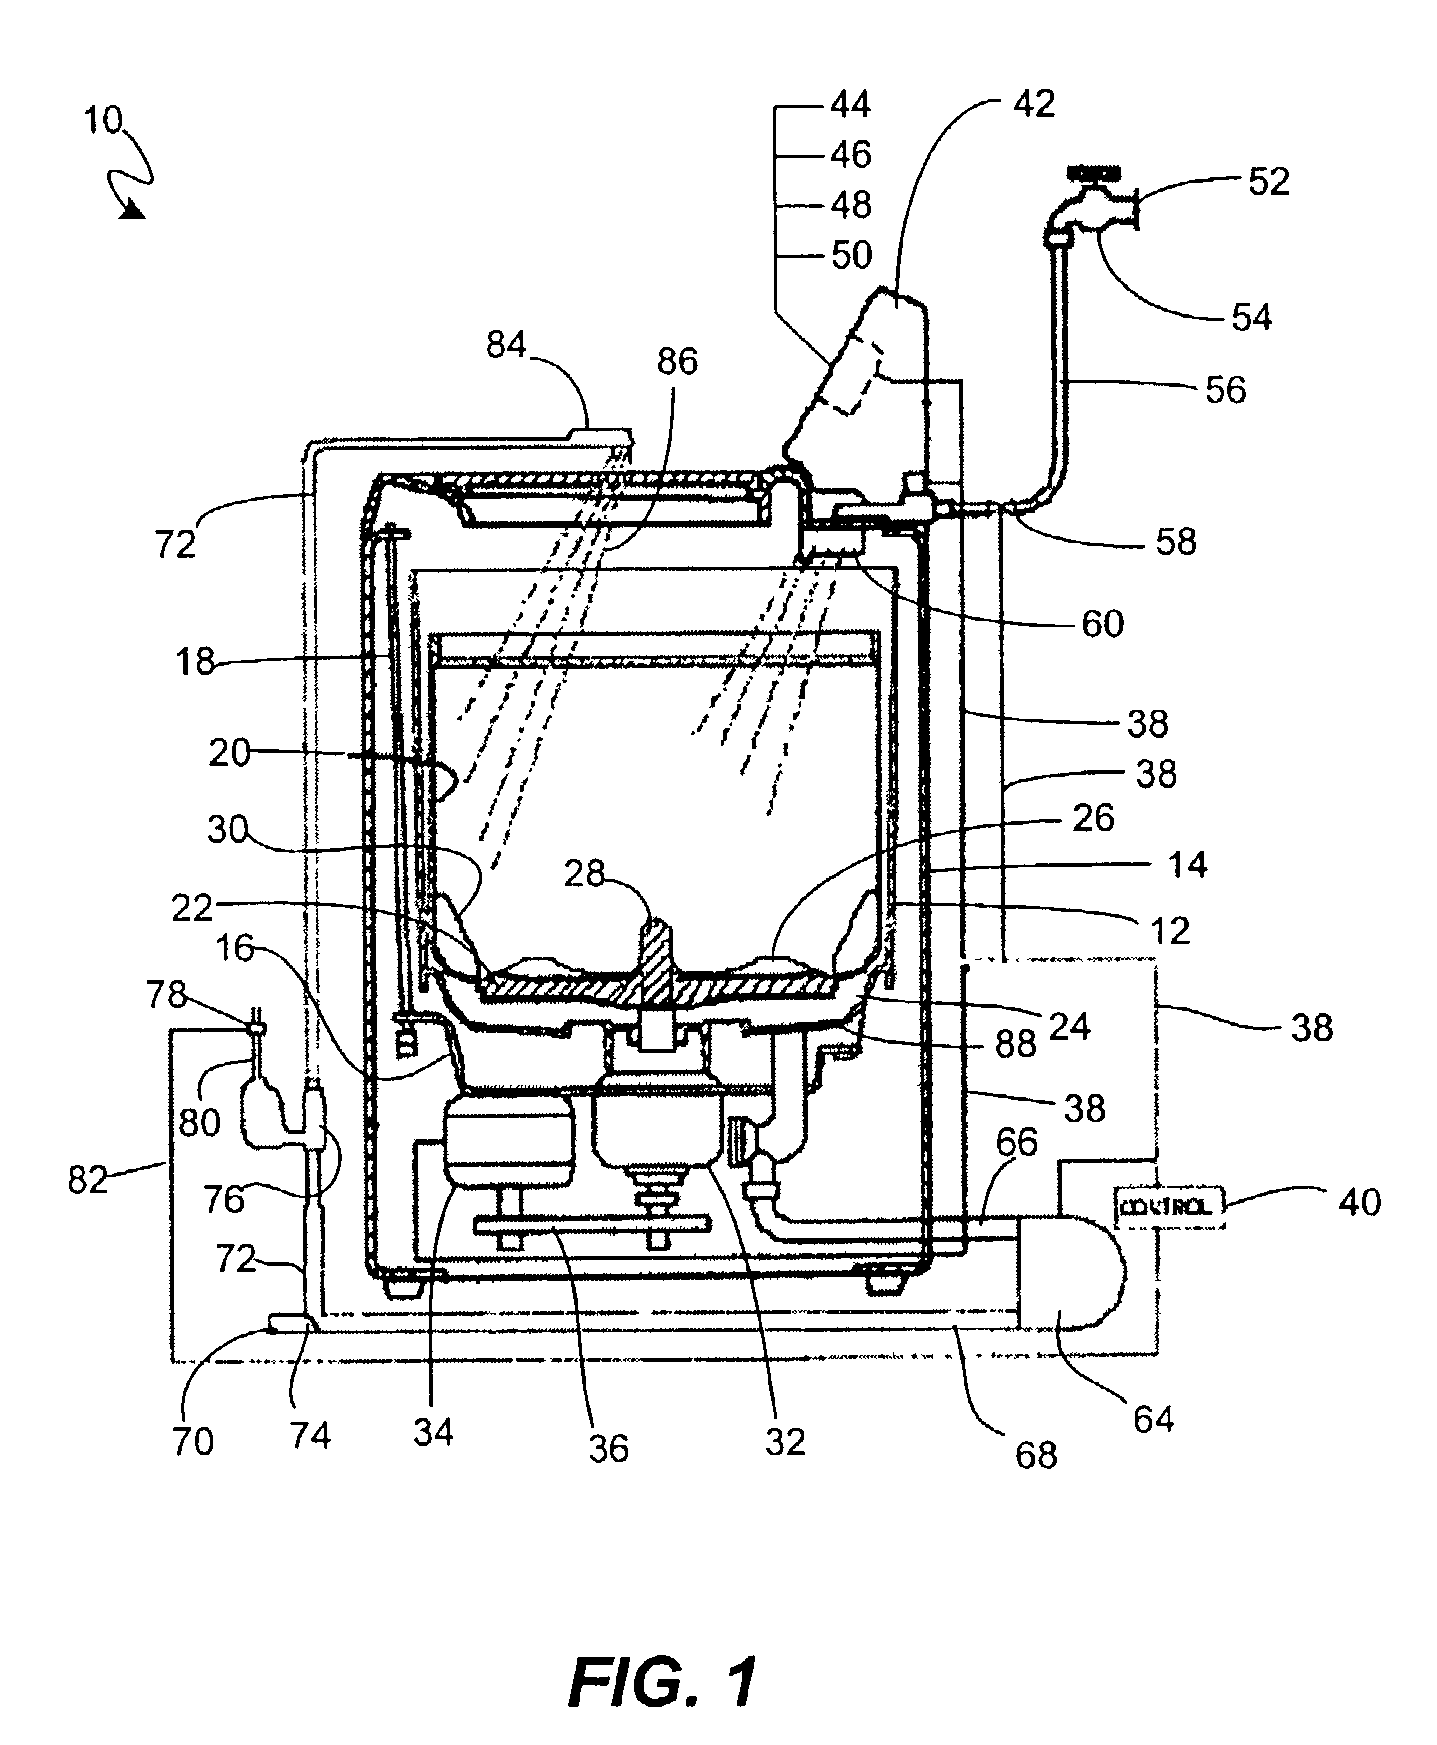 Method for washing varying clothes loads in automatic washer using common water level